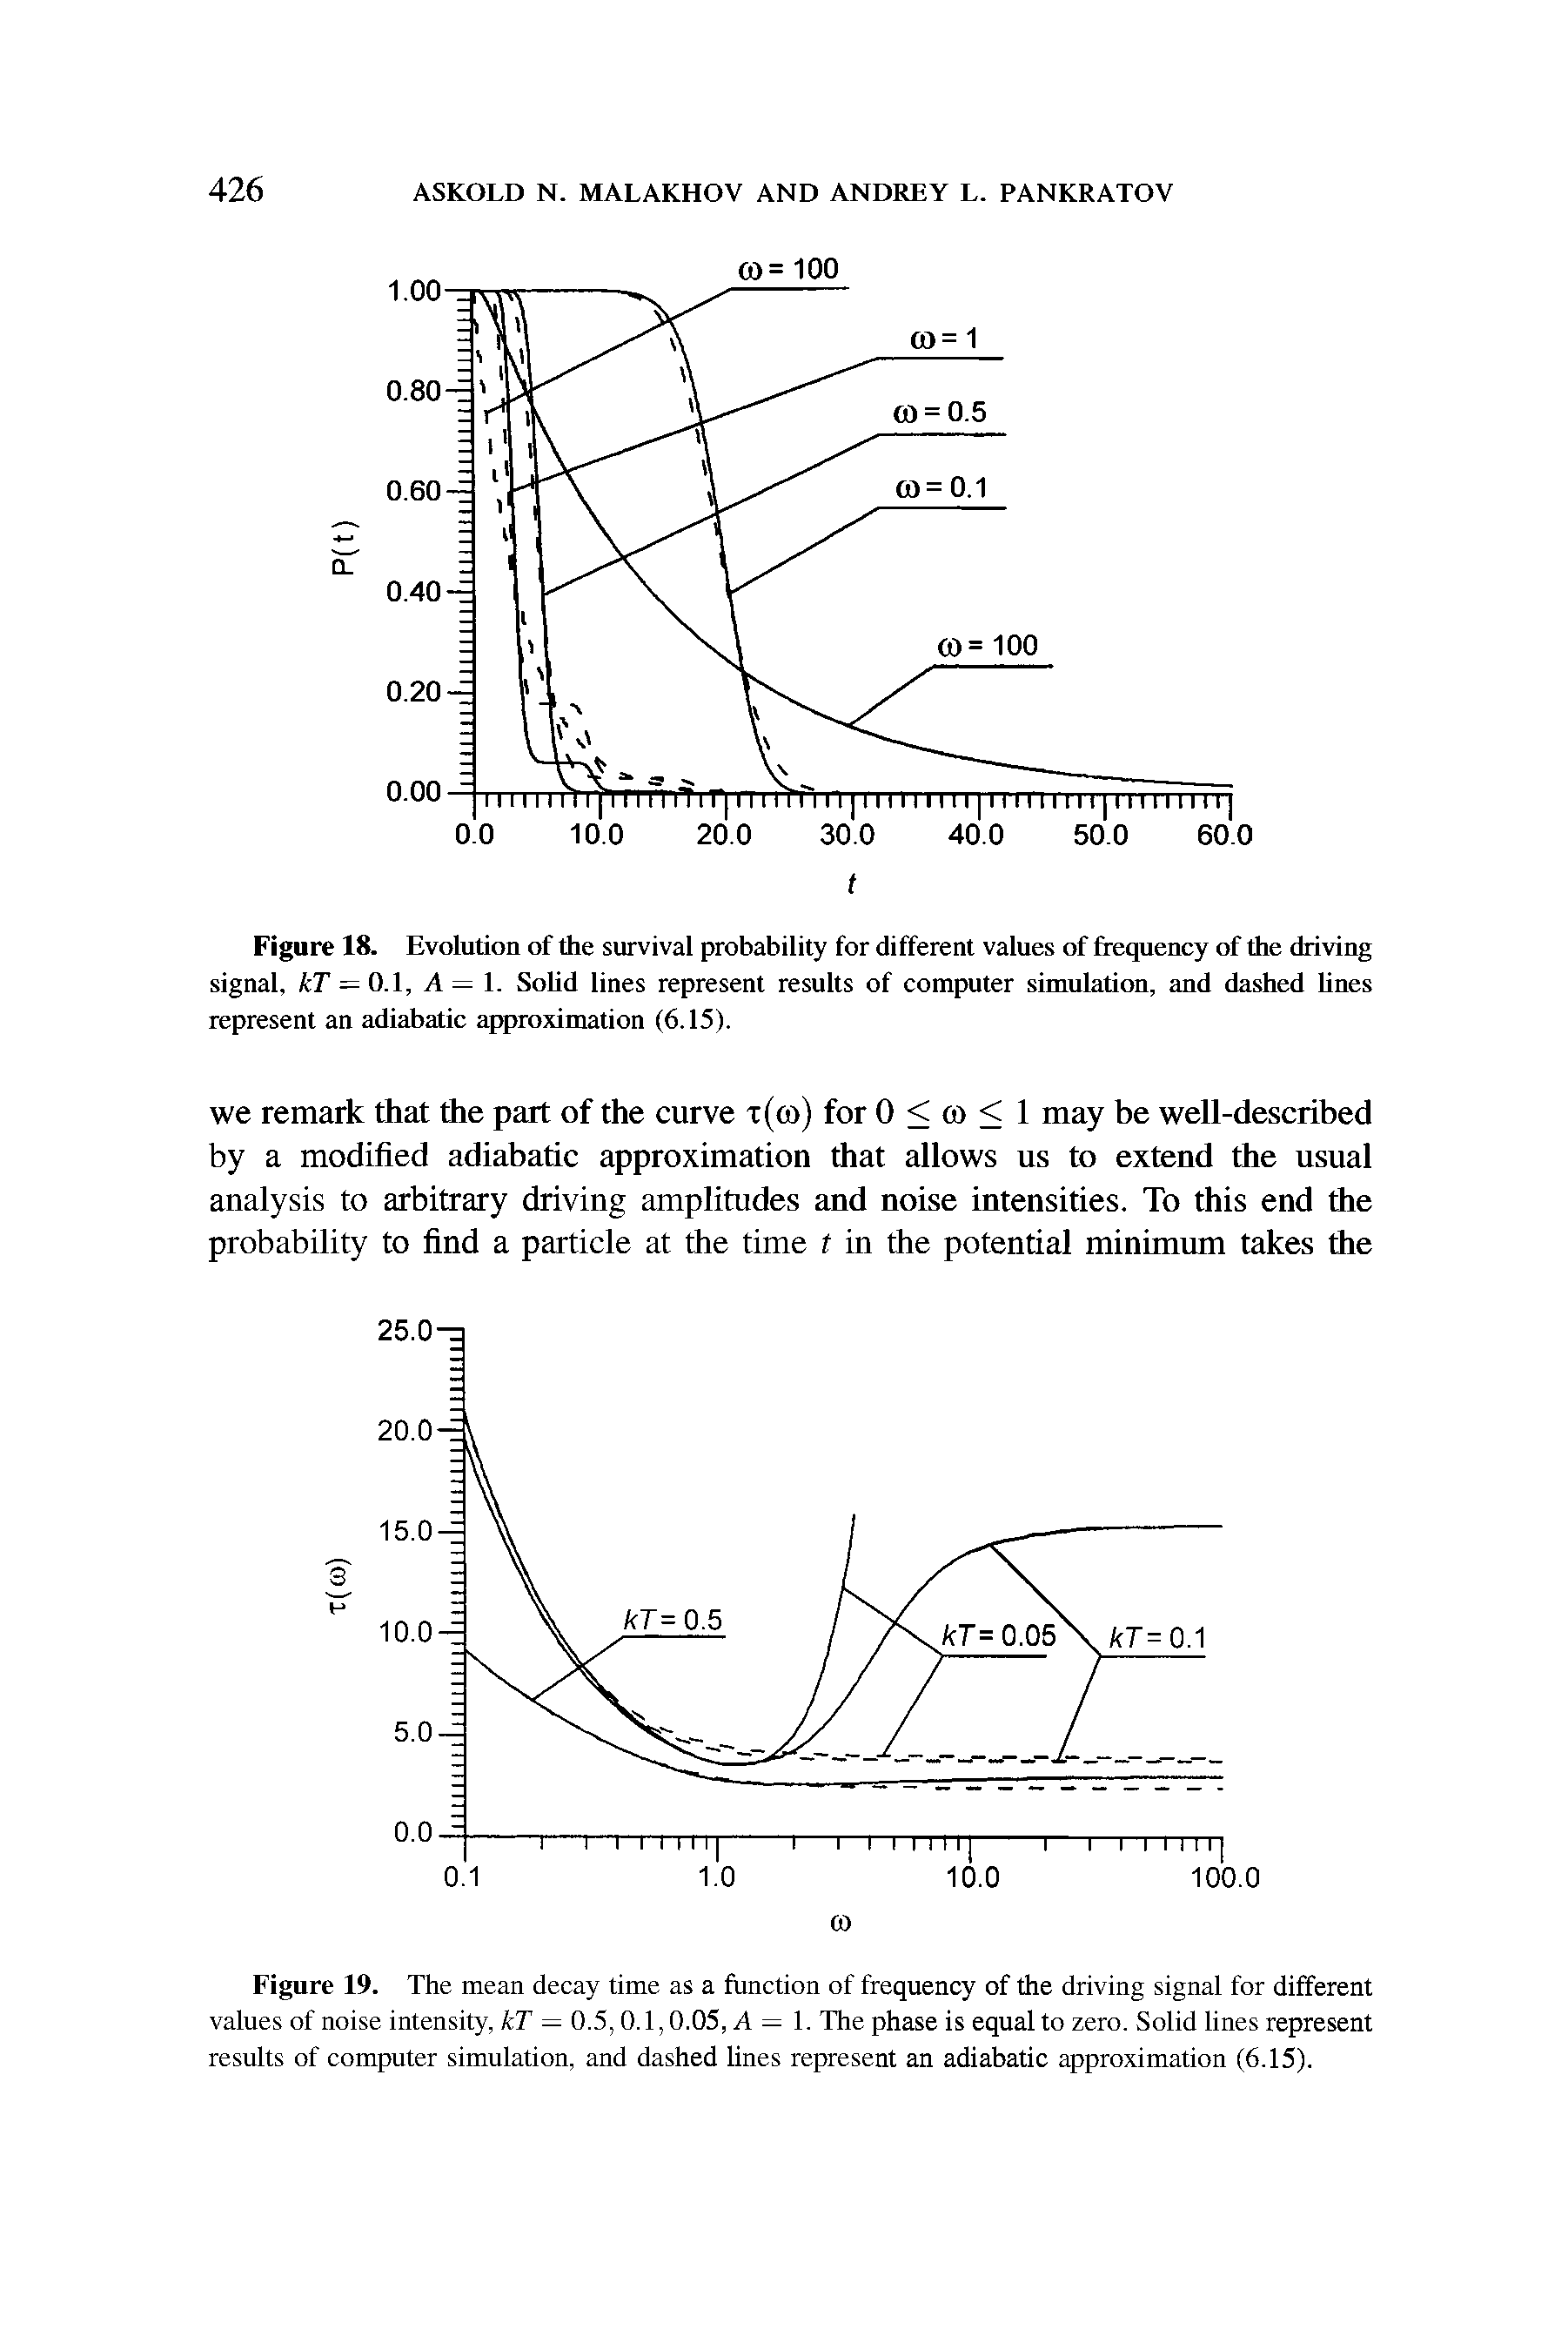 Figure 19. The mean decay time as a function of frequency of the driving signal for different values of noise intensity, kT — 0.5,0.1,0.05, A — 1. The phase is equal to zero. Solid lines represent results of computer simulation, and dashed lines represent an adiabatic approximation (6.15).